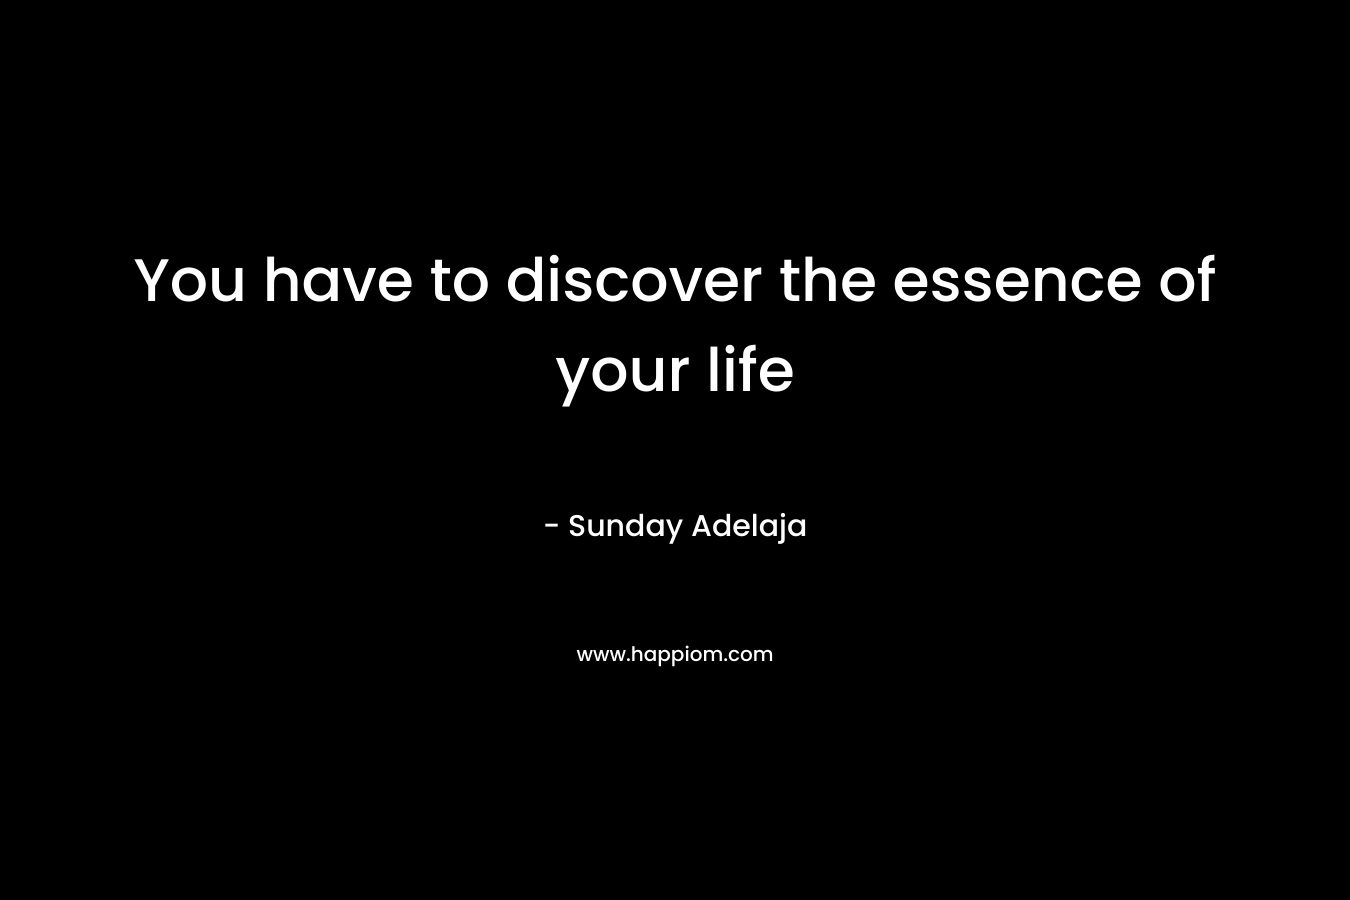 You have to discover the essence of your life